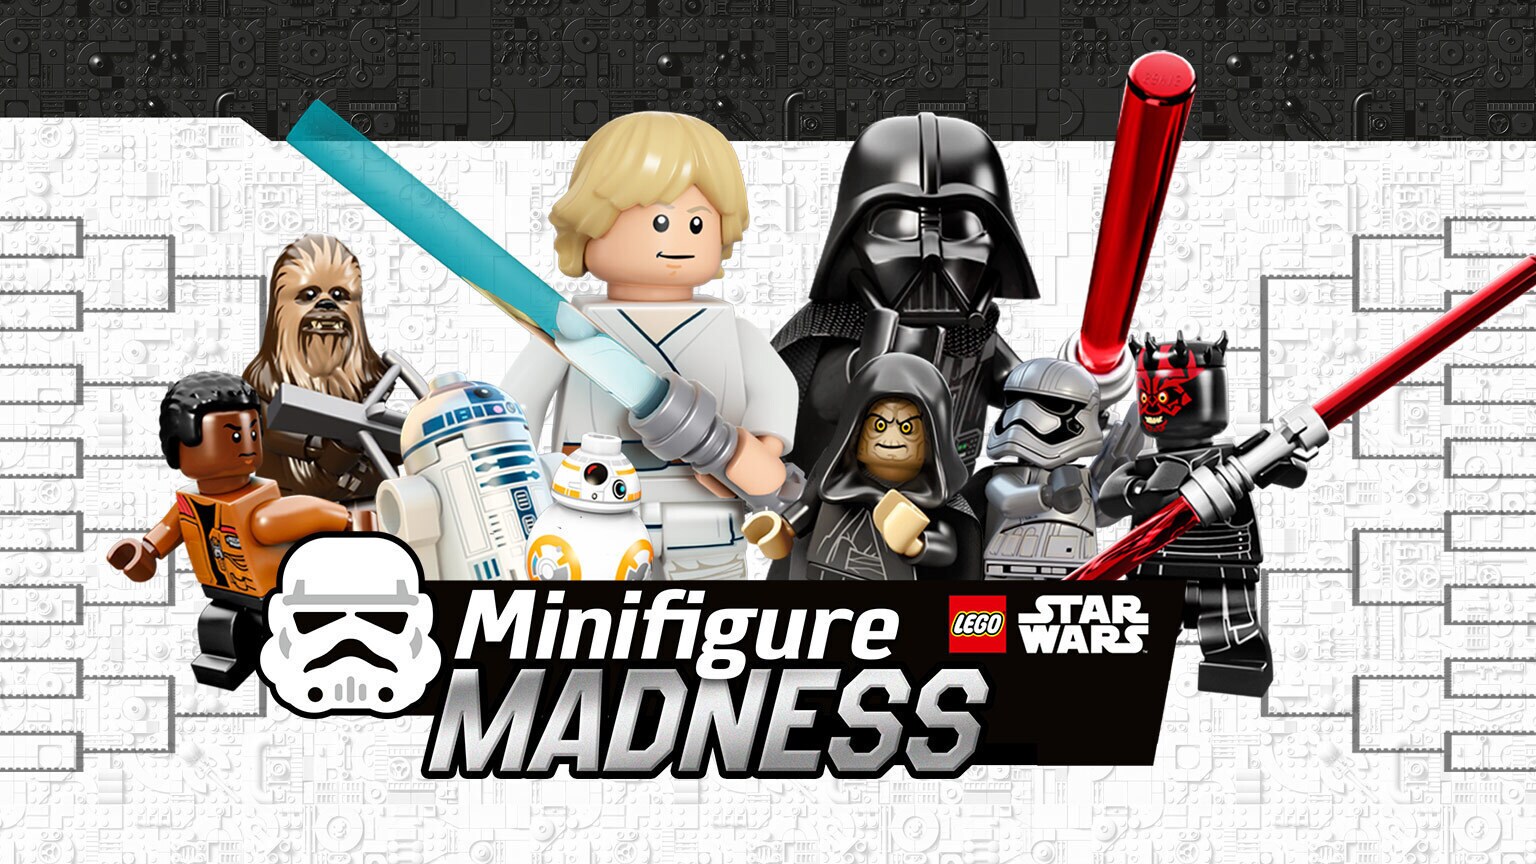 Get Ready for the LEGO Star Wars Minifigure Madness Tournament!